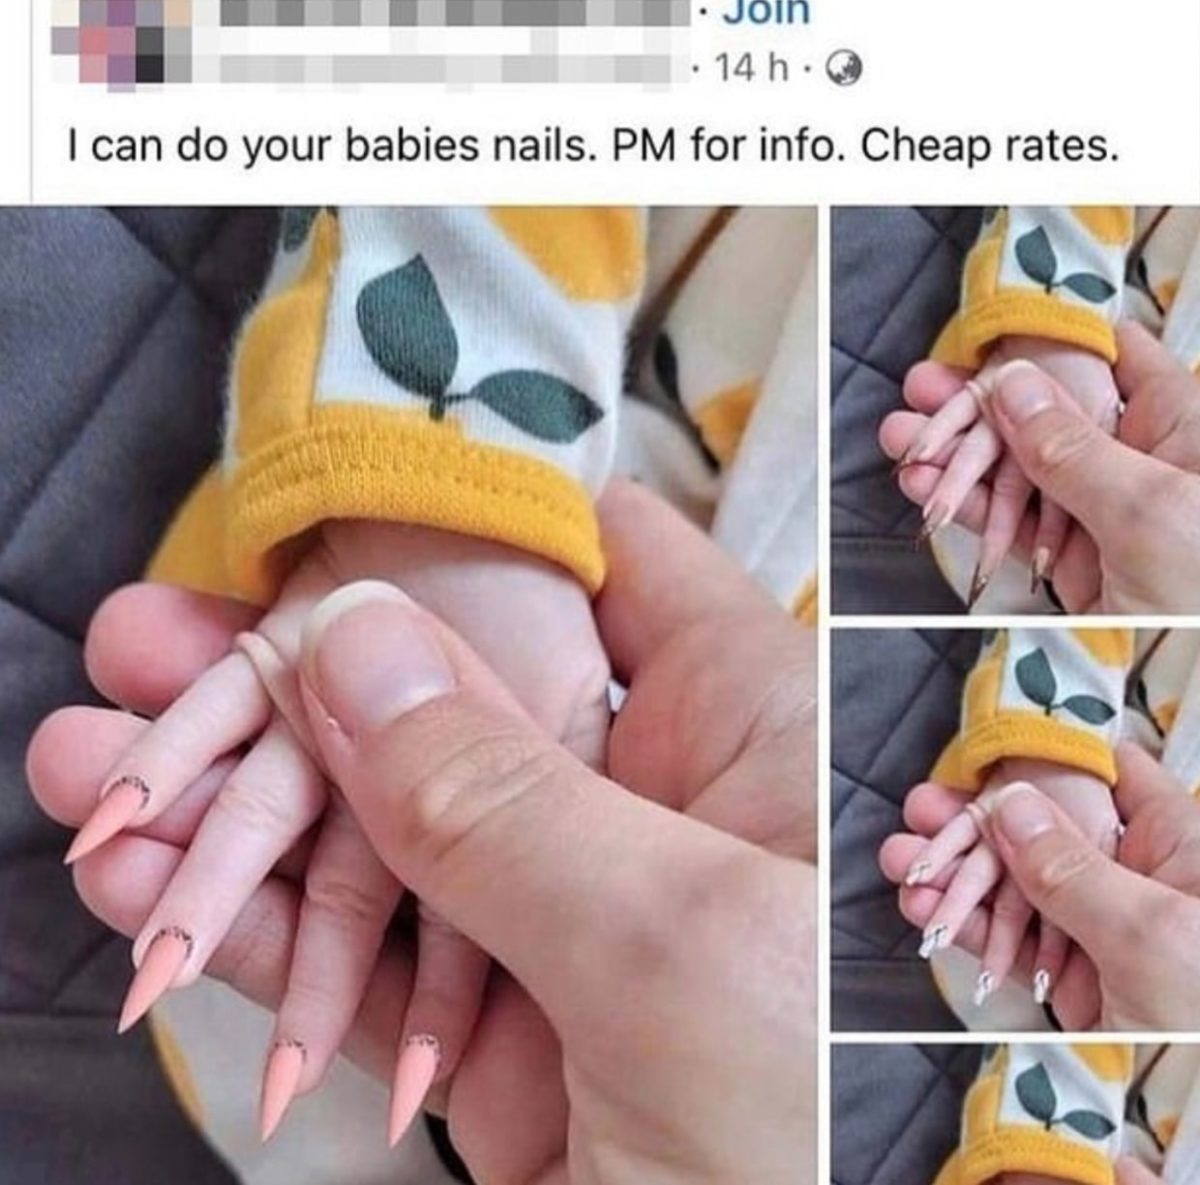 Woman Posts Ad For Doing Baby's Nails -- Reactions Priceless